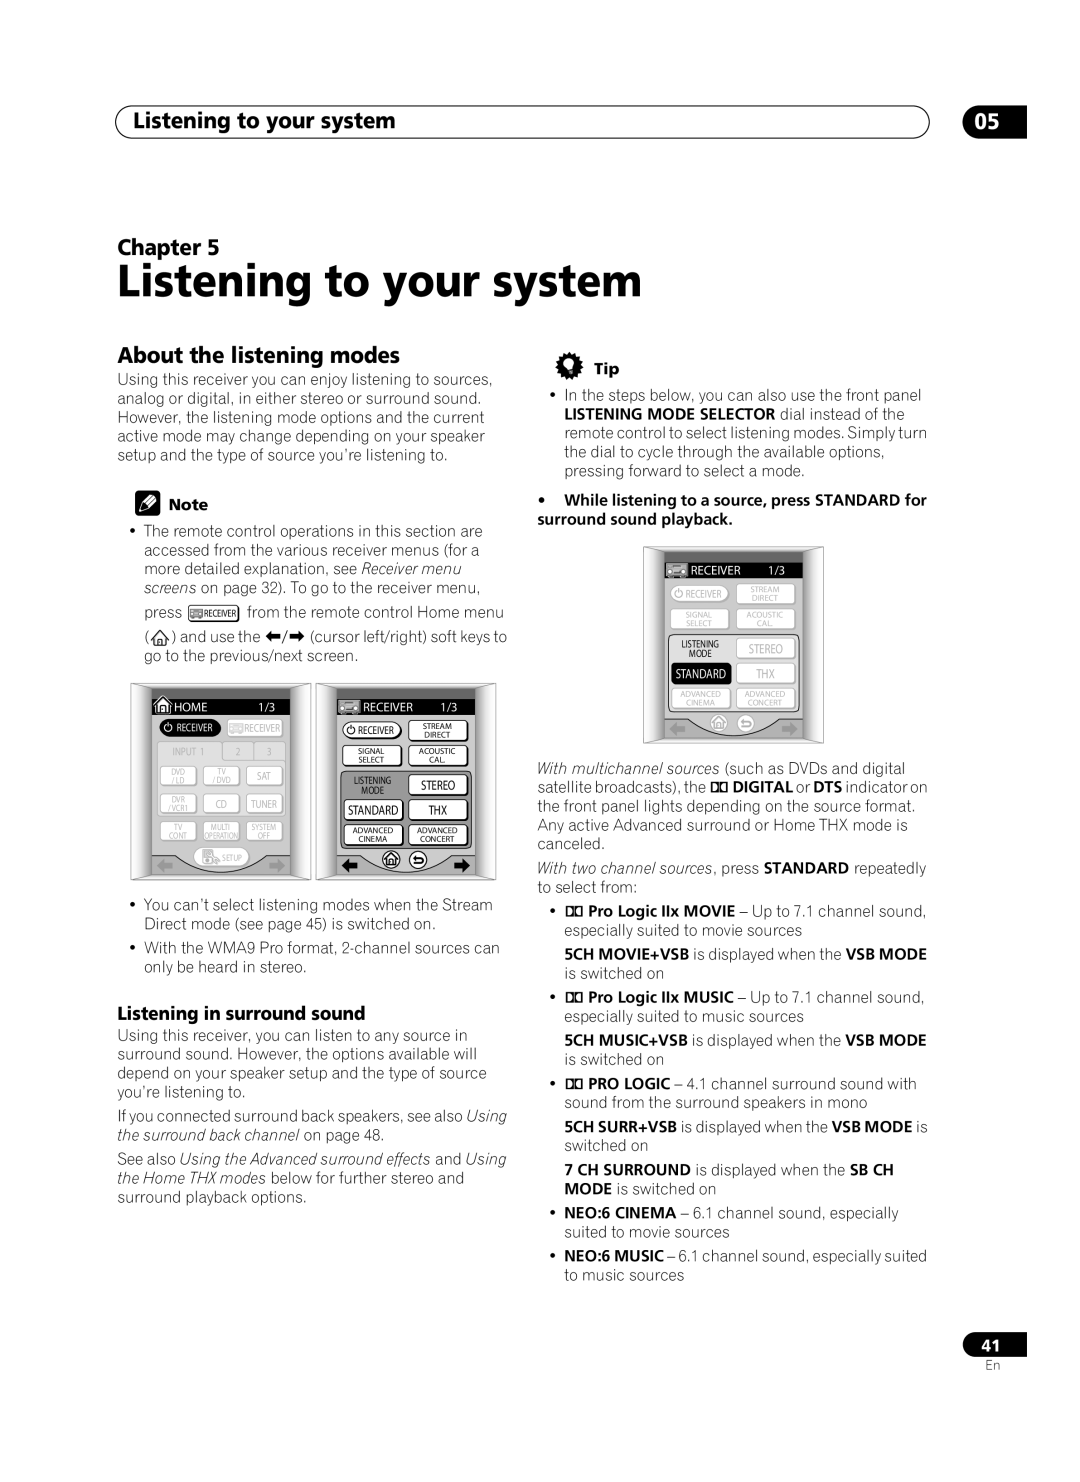 Pioneer VSX-AX10Ai-G manual Listening to your system, Chapter, About the listening modes, Listening in surround sound 